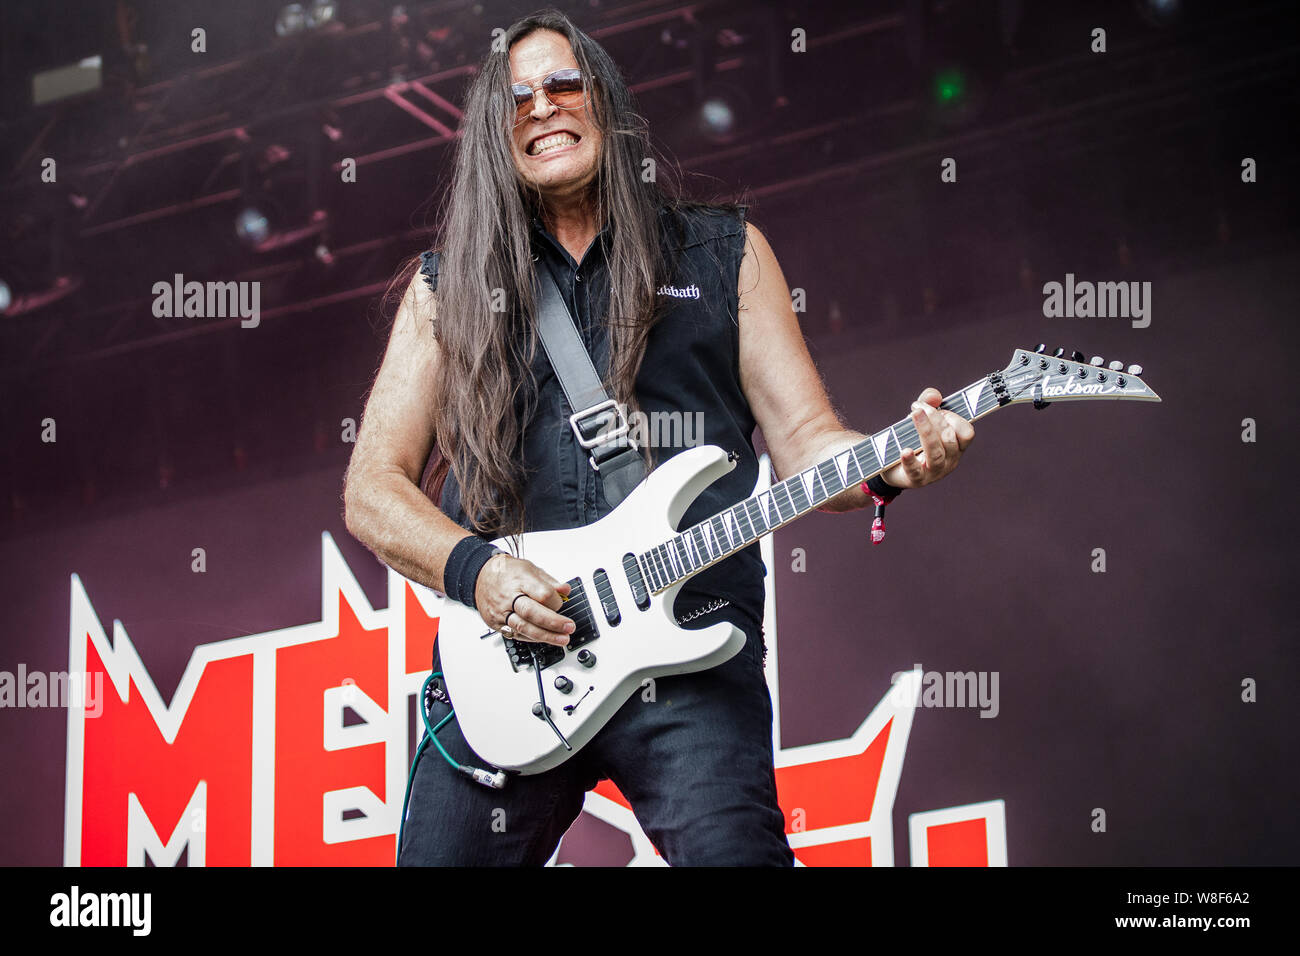 Metal Church perform live on stage at Bloodstock Open Air Festival, UK, 9th Aug, 2019. Stock Photo